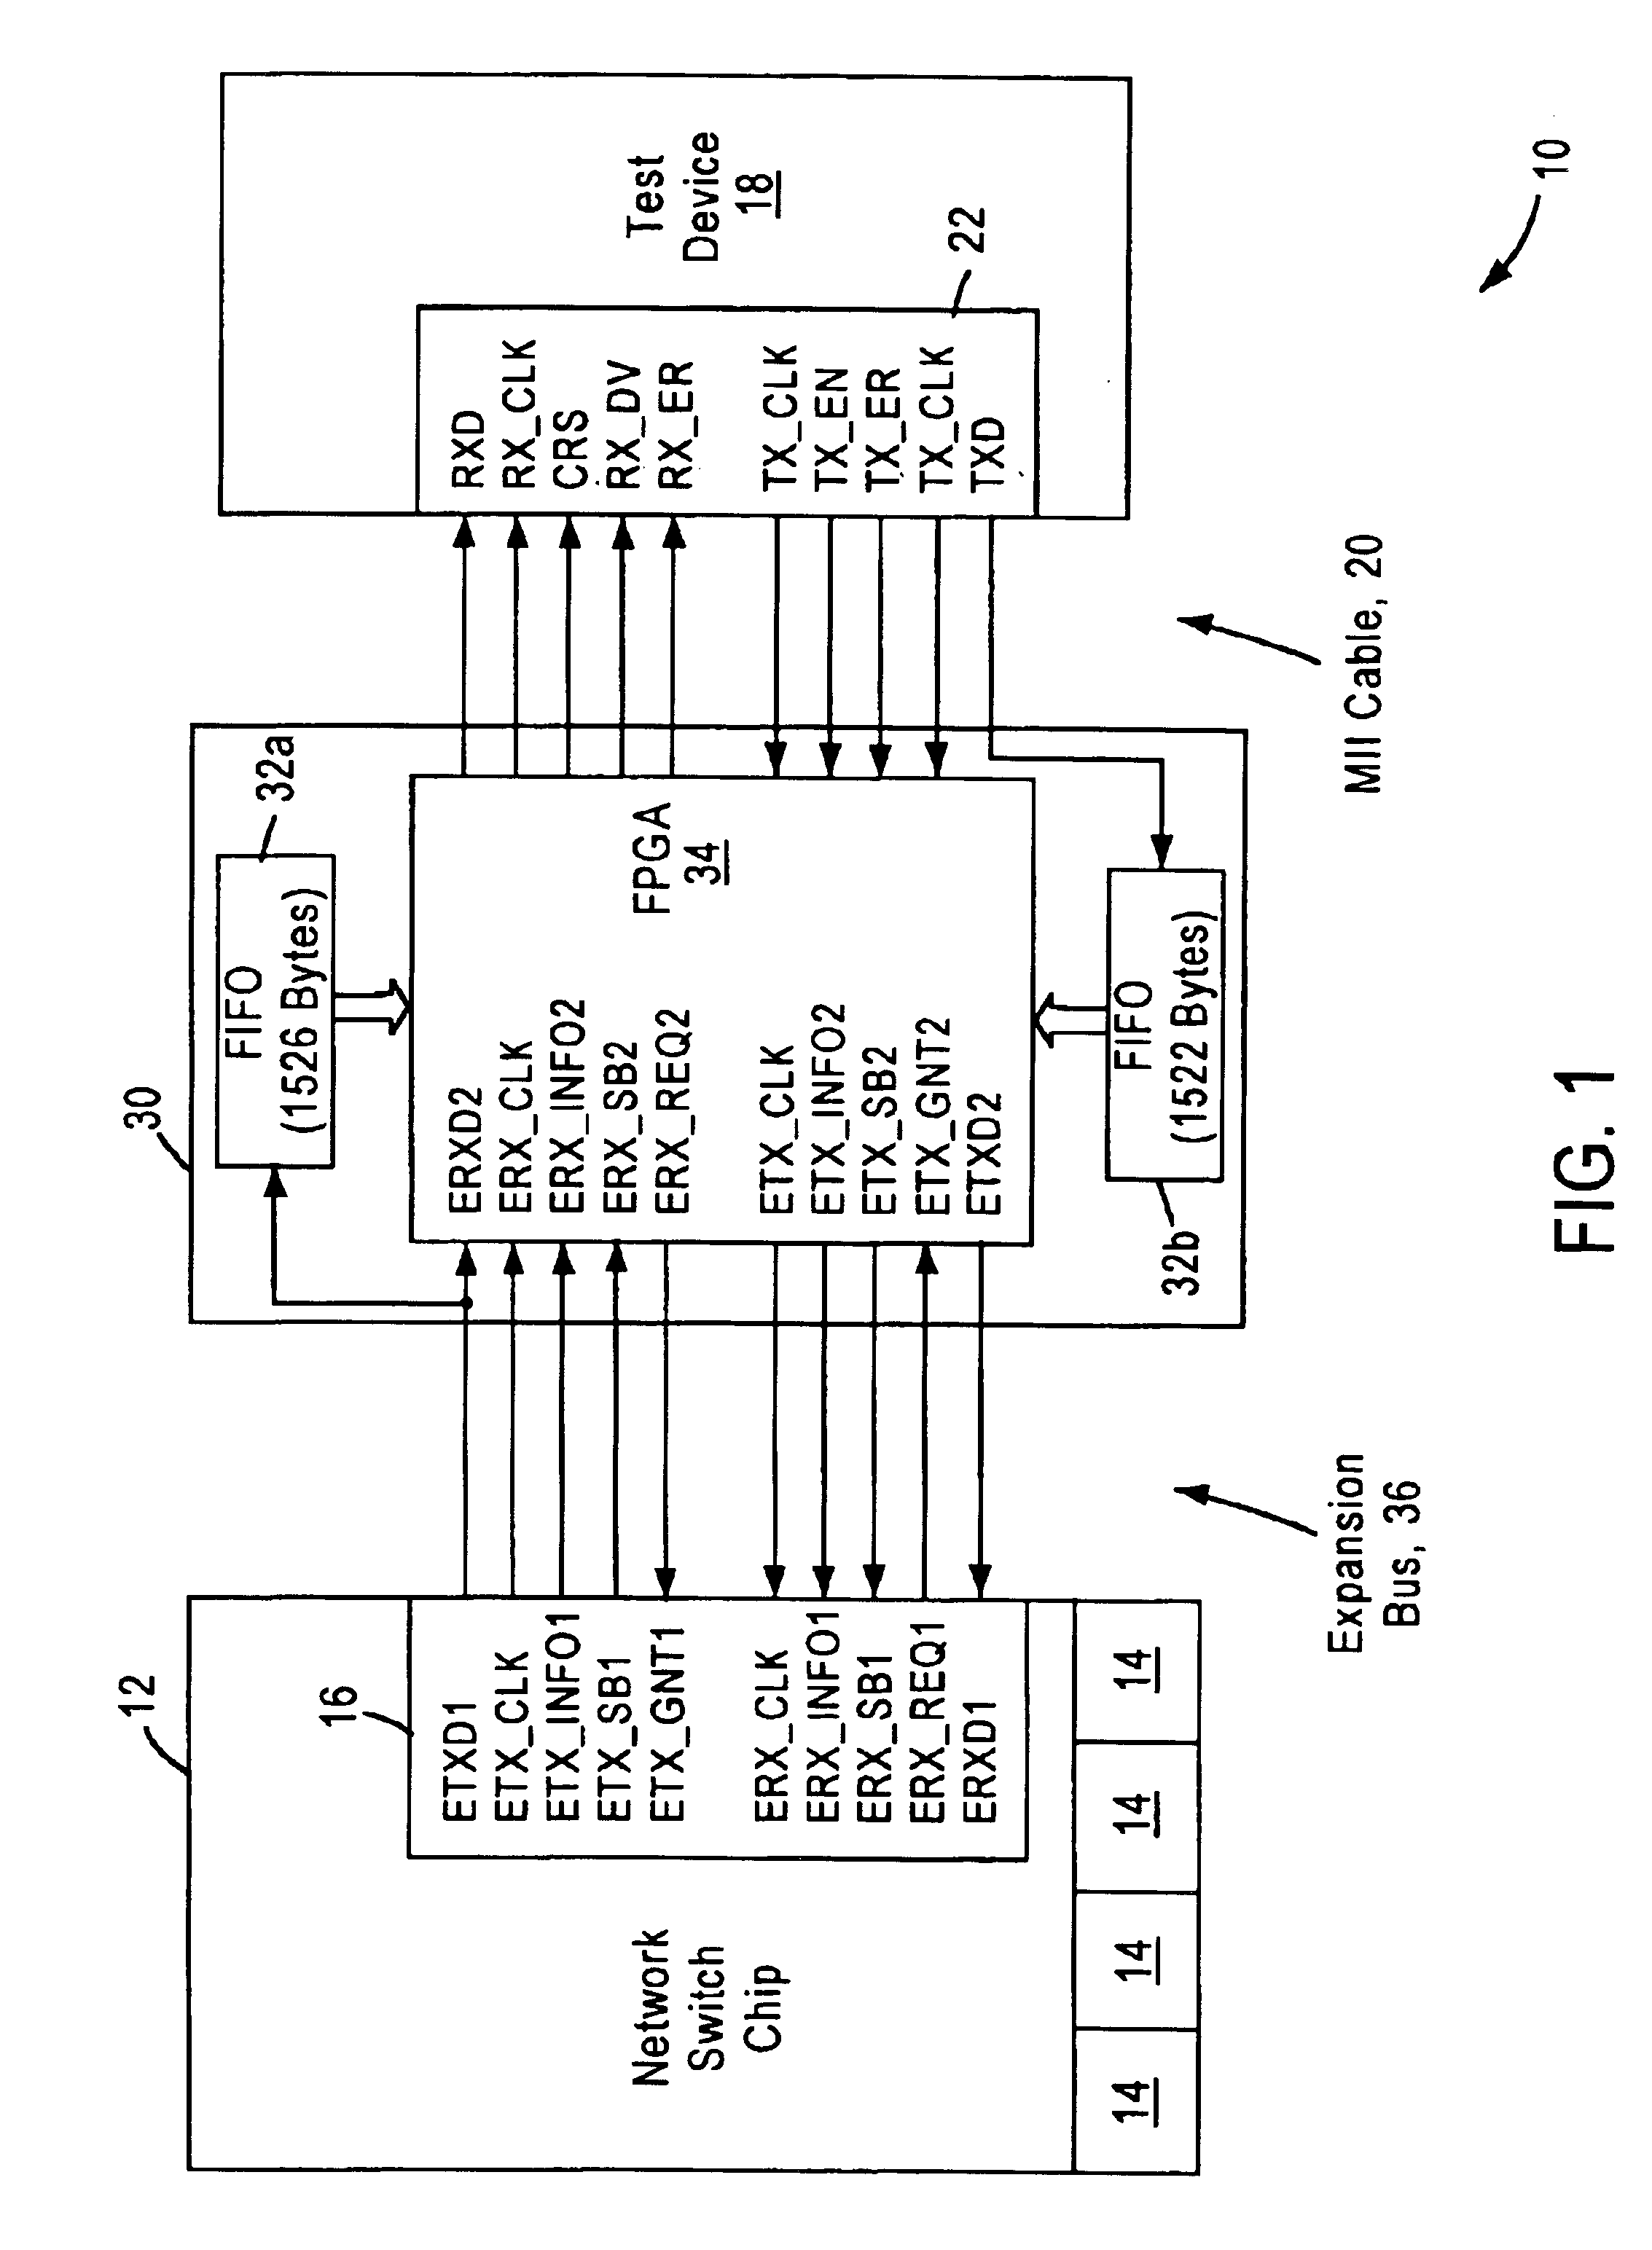 Arrangement for testing network switch expansion port data by converting to media independent interface format